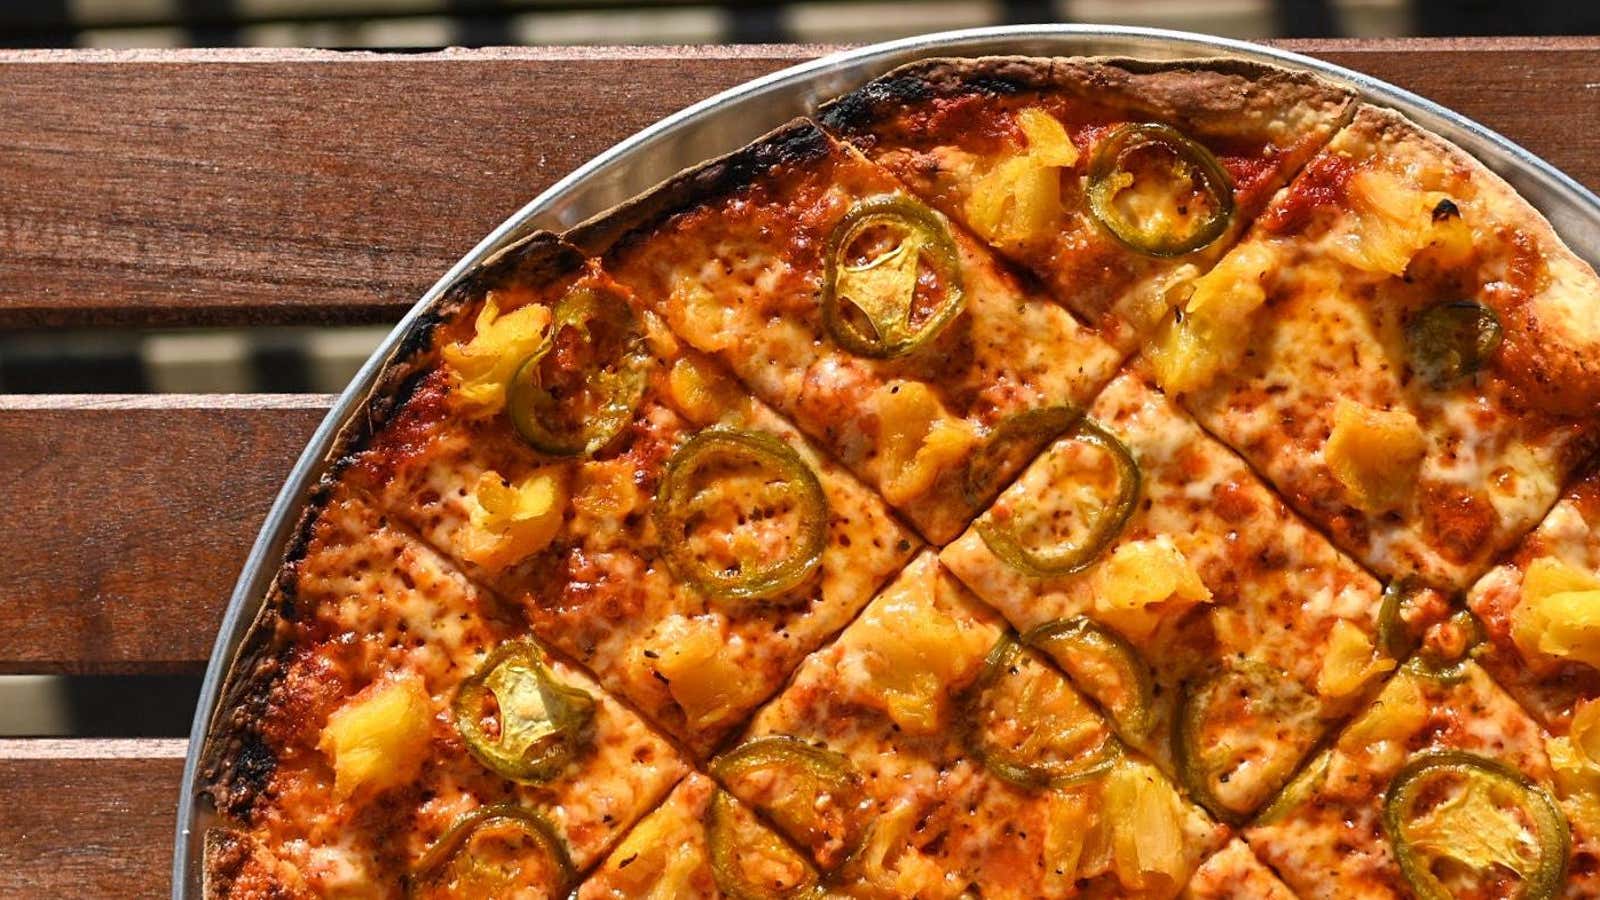 You’re Actually Missing Out on the Best Pineapple Pizzas